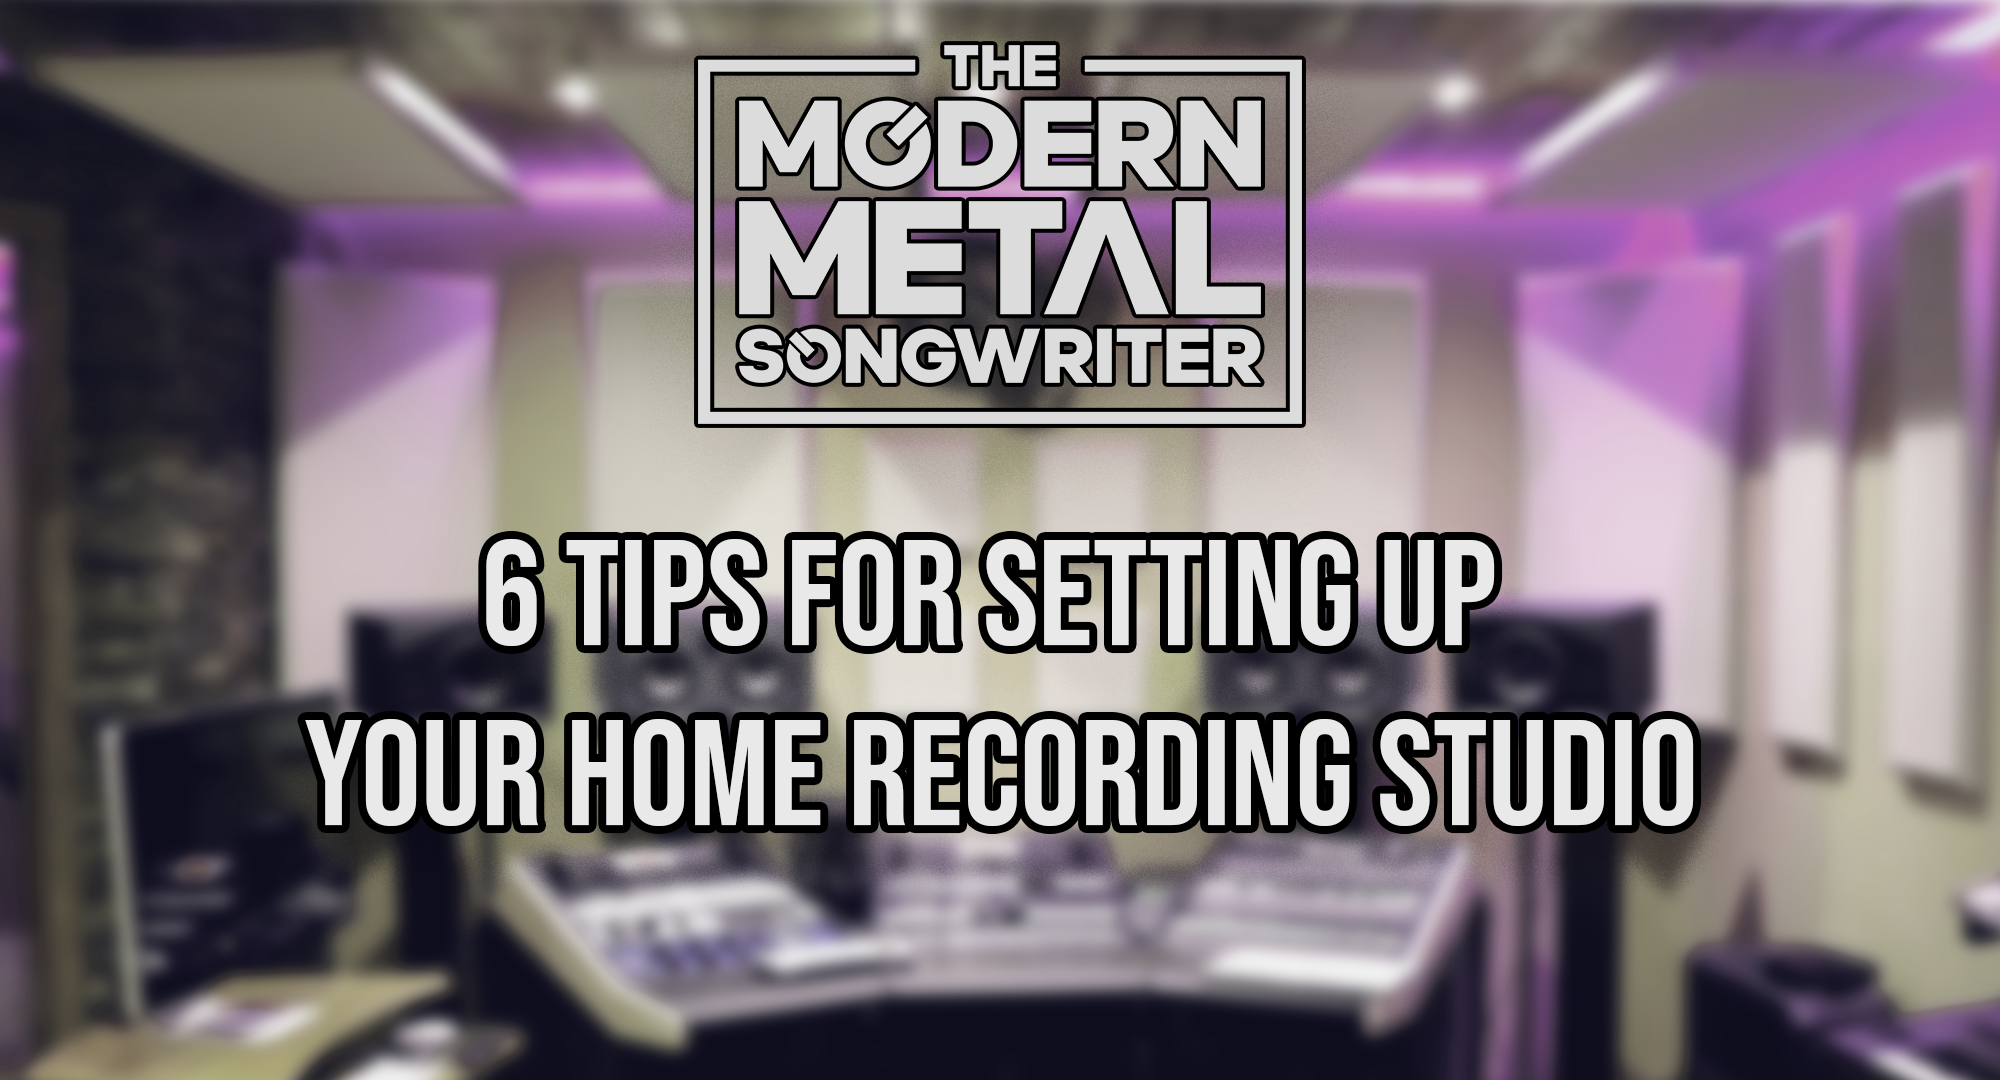 6-Tips-for-Setting-Up-Your-Home-Recording-Studio ModernMetalSongwriter graphic